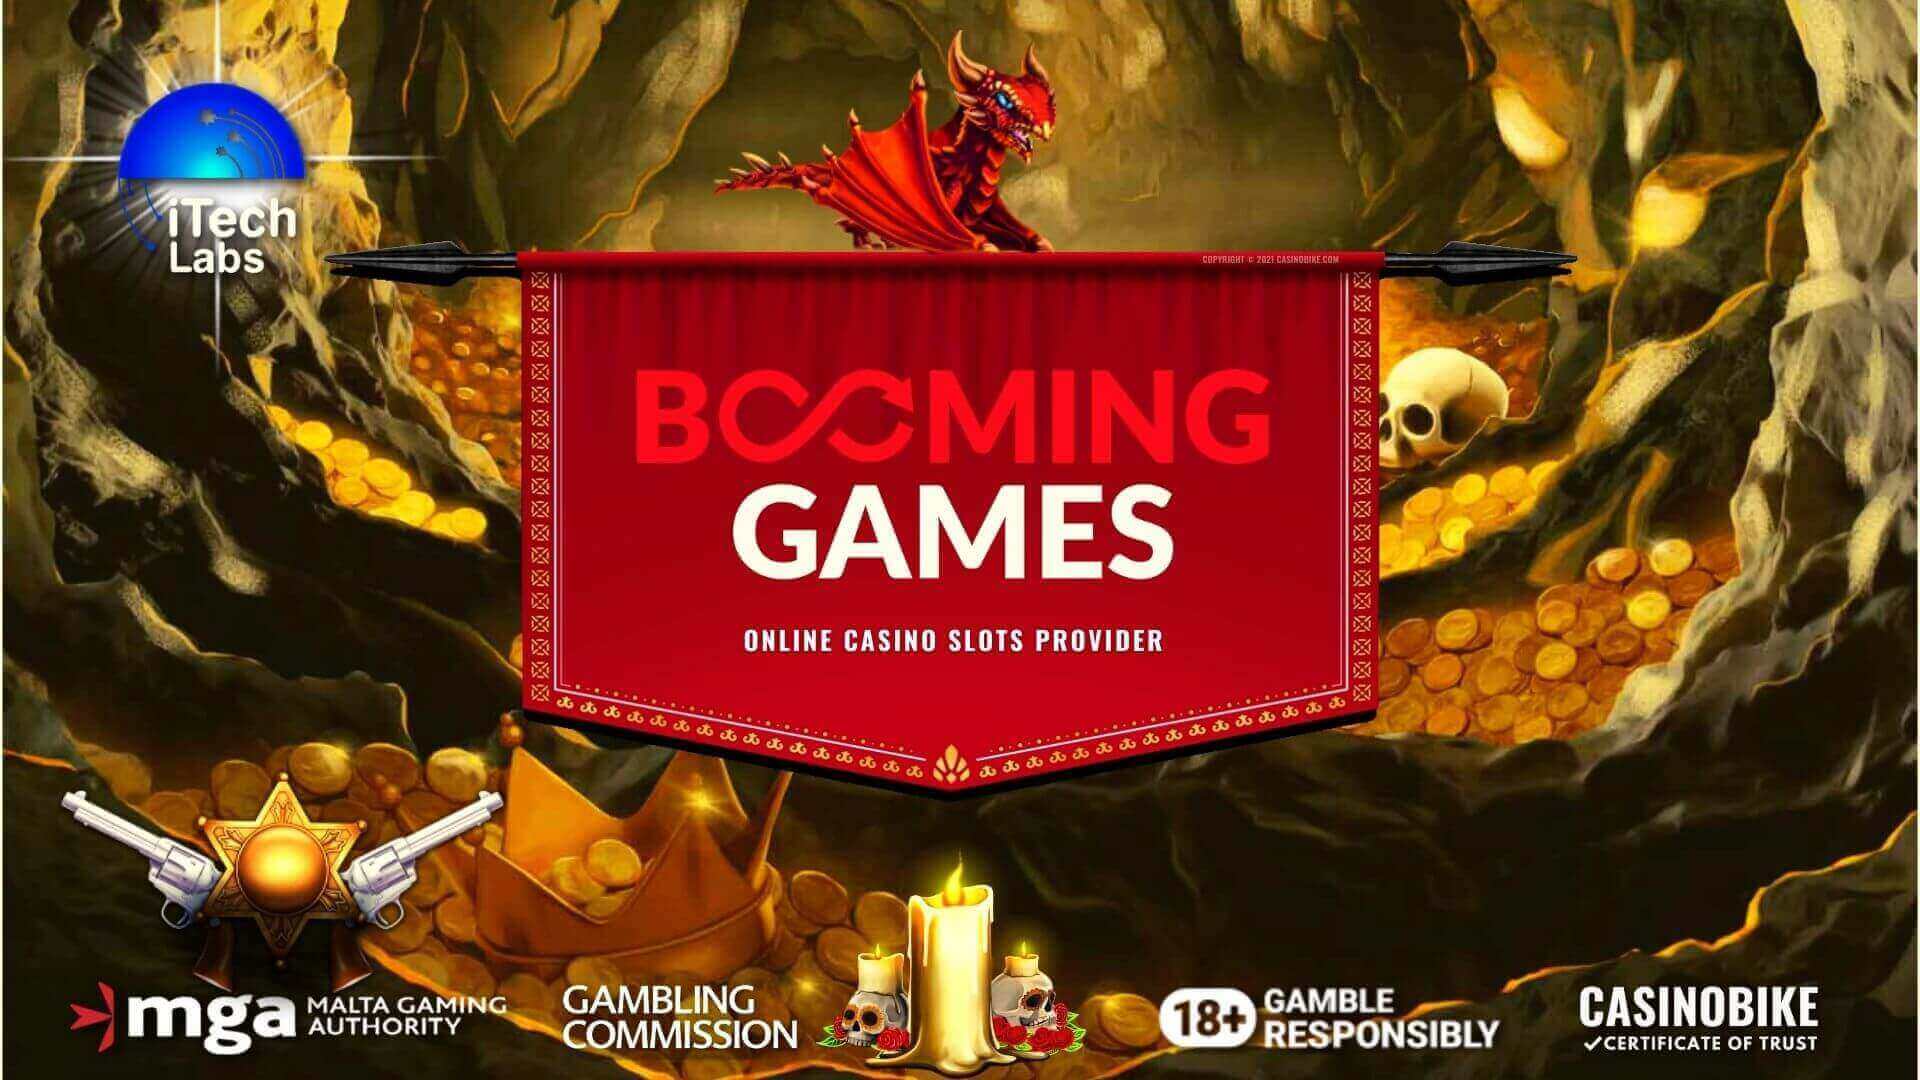 Booming Games Online Casino Slots Provider Review